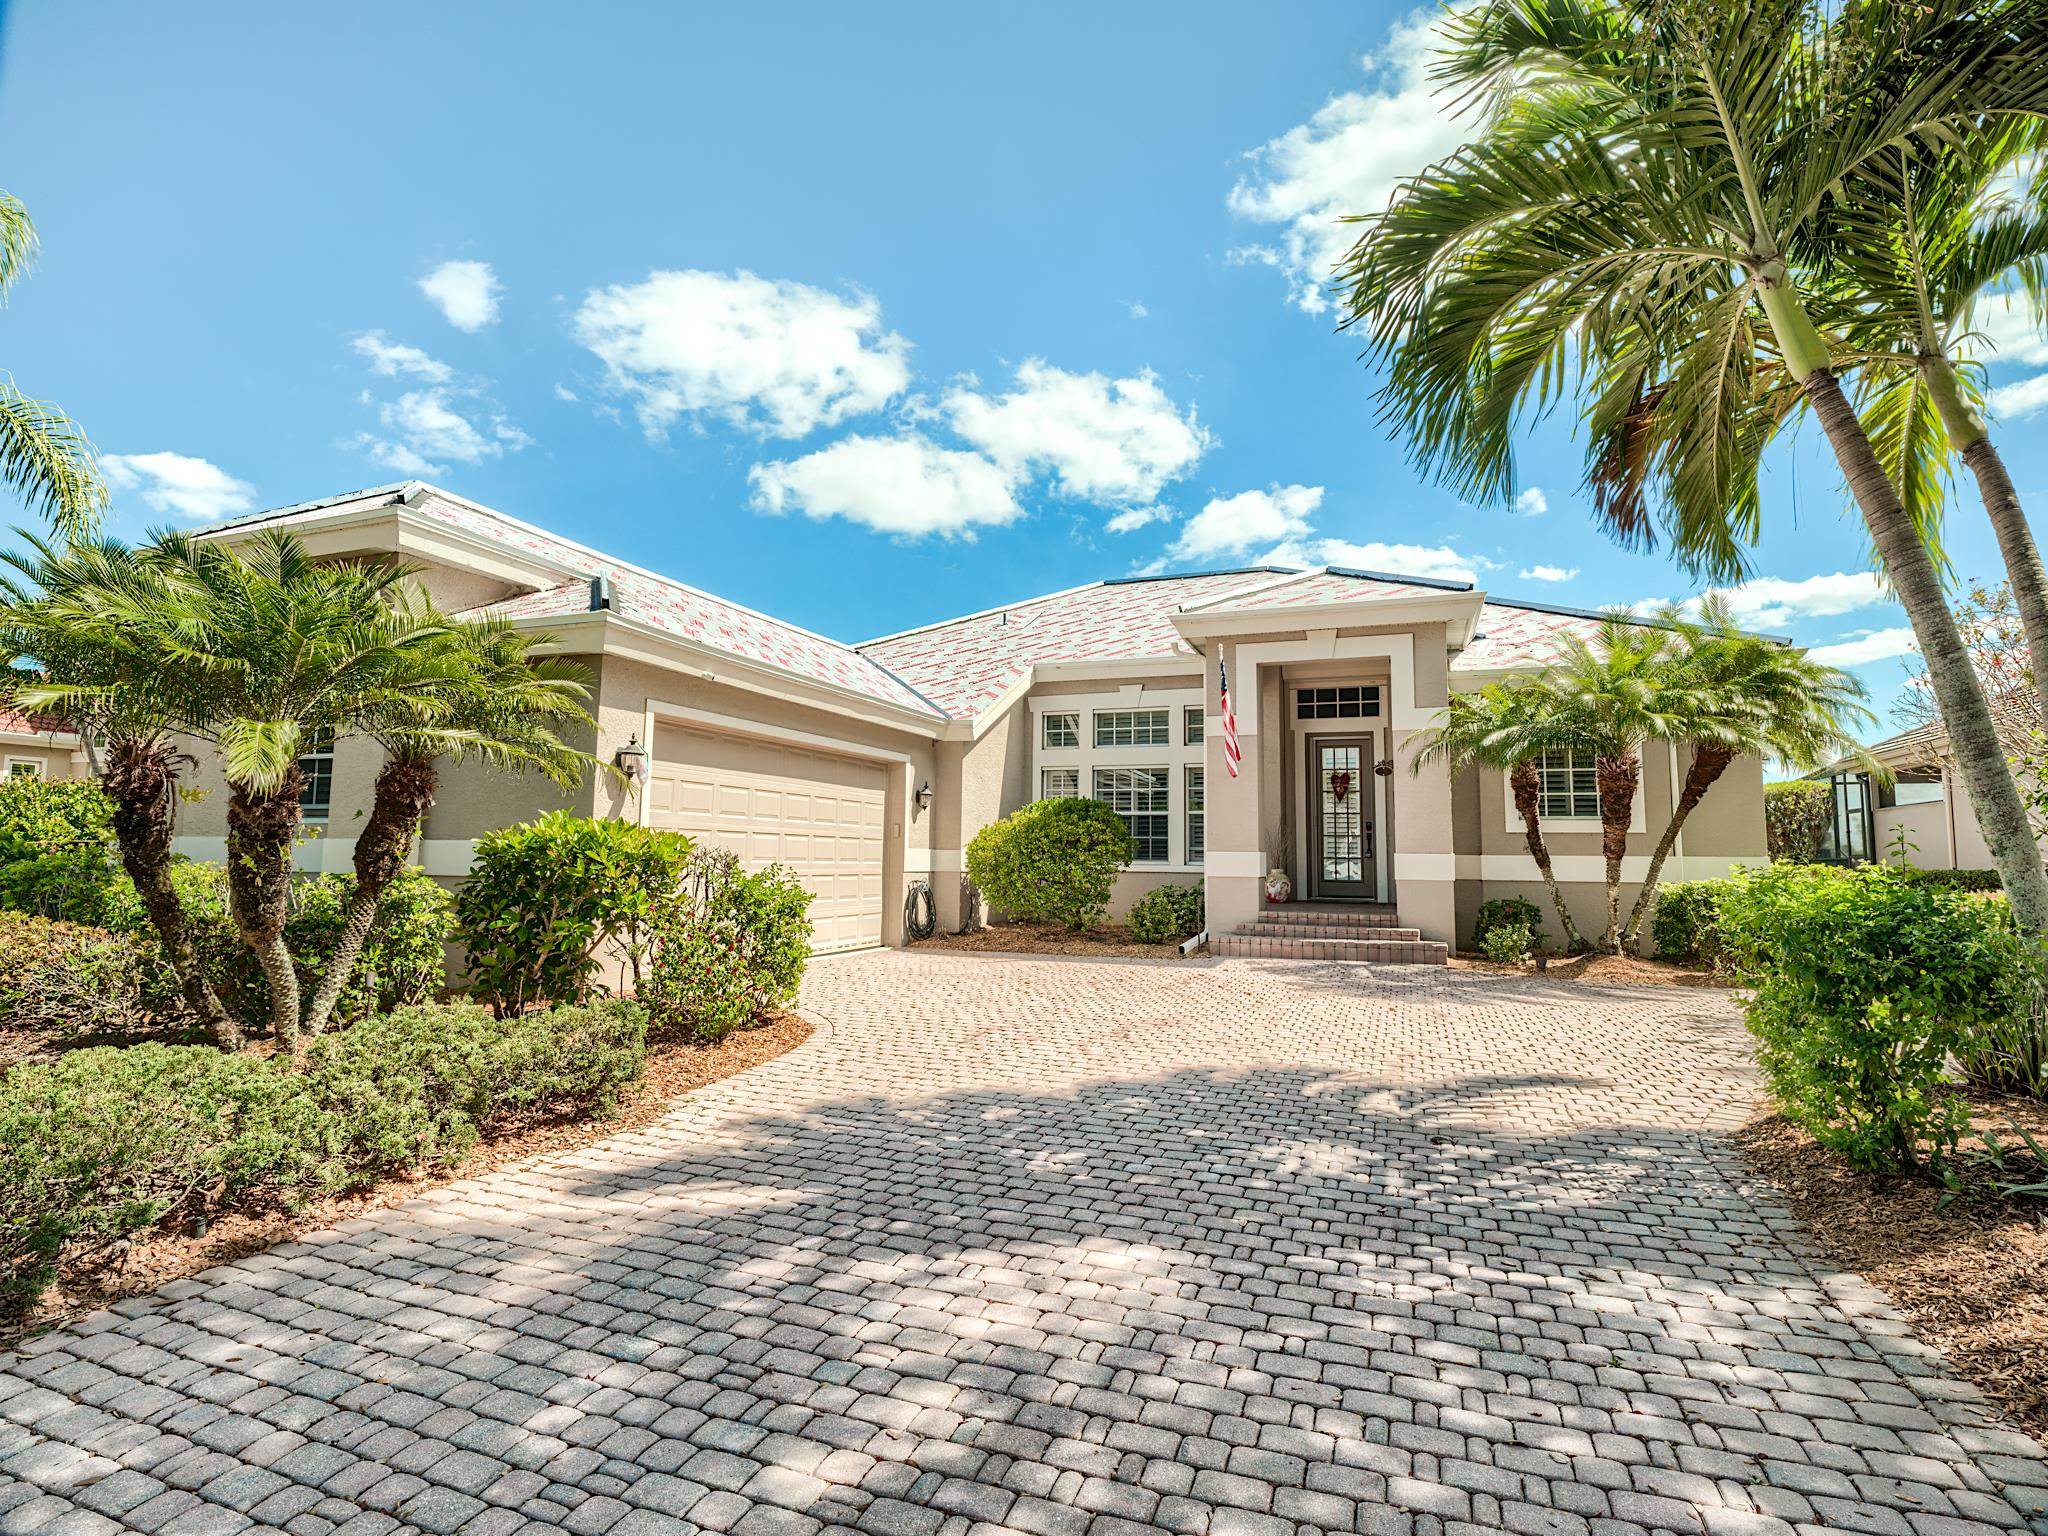 8802 New Castle Dr, Fort Myers, Florida 33908, 3 Bedrooms Bedrooms, ,2 BathroomsBathrooms,Residential,For Sale,New Castle Dr,2240180